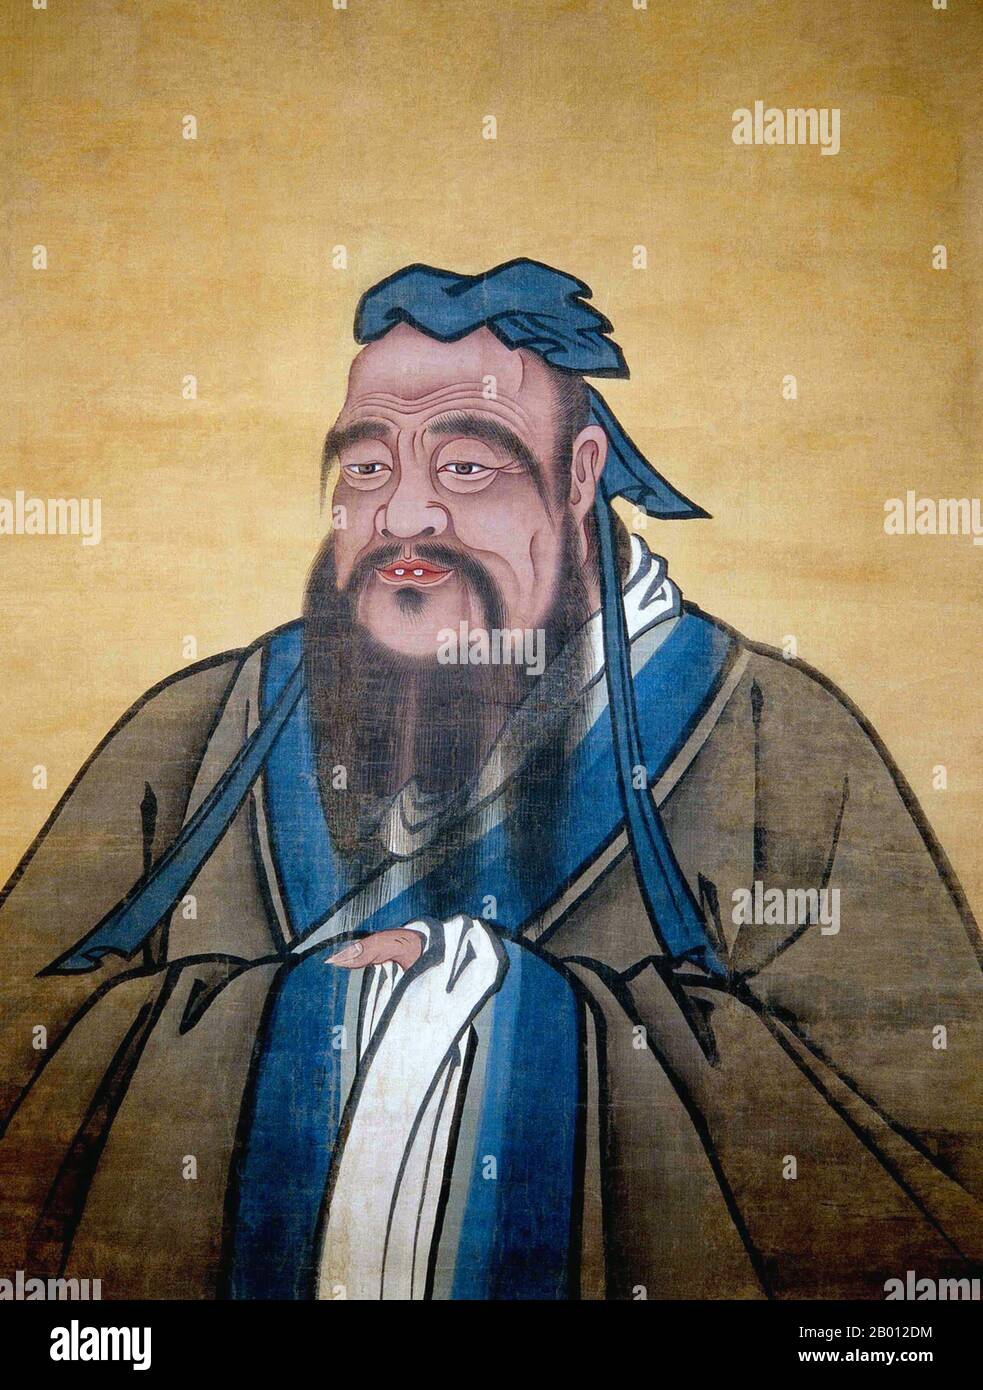 China: Confucius (Kong Zi, K'ung-tzu, K'ung-fu-tzu, 551– 479 BCE), celebrated Chinese philosopher of the Spring and Autumn Period.  The philosophy of Confucius emphasises personal and governmental morality, correctness of social relationships, justice and sincerity. These values gained prominence in China during the Han Dynasty(206 BC – 220 AD). Confucius' thoughts have been developed into a system of philosophy known as Confucianism. It was introduced to Europe by the Italian Jesuit Matteo Ricci, who was the first to Latinise the name as 'Confucius'. Stock Photo